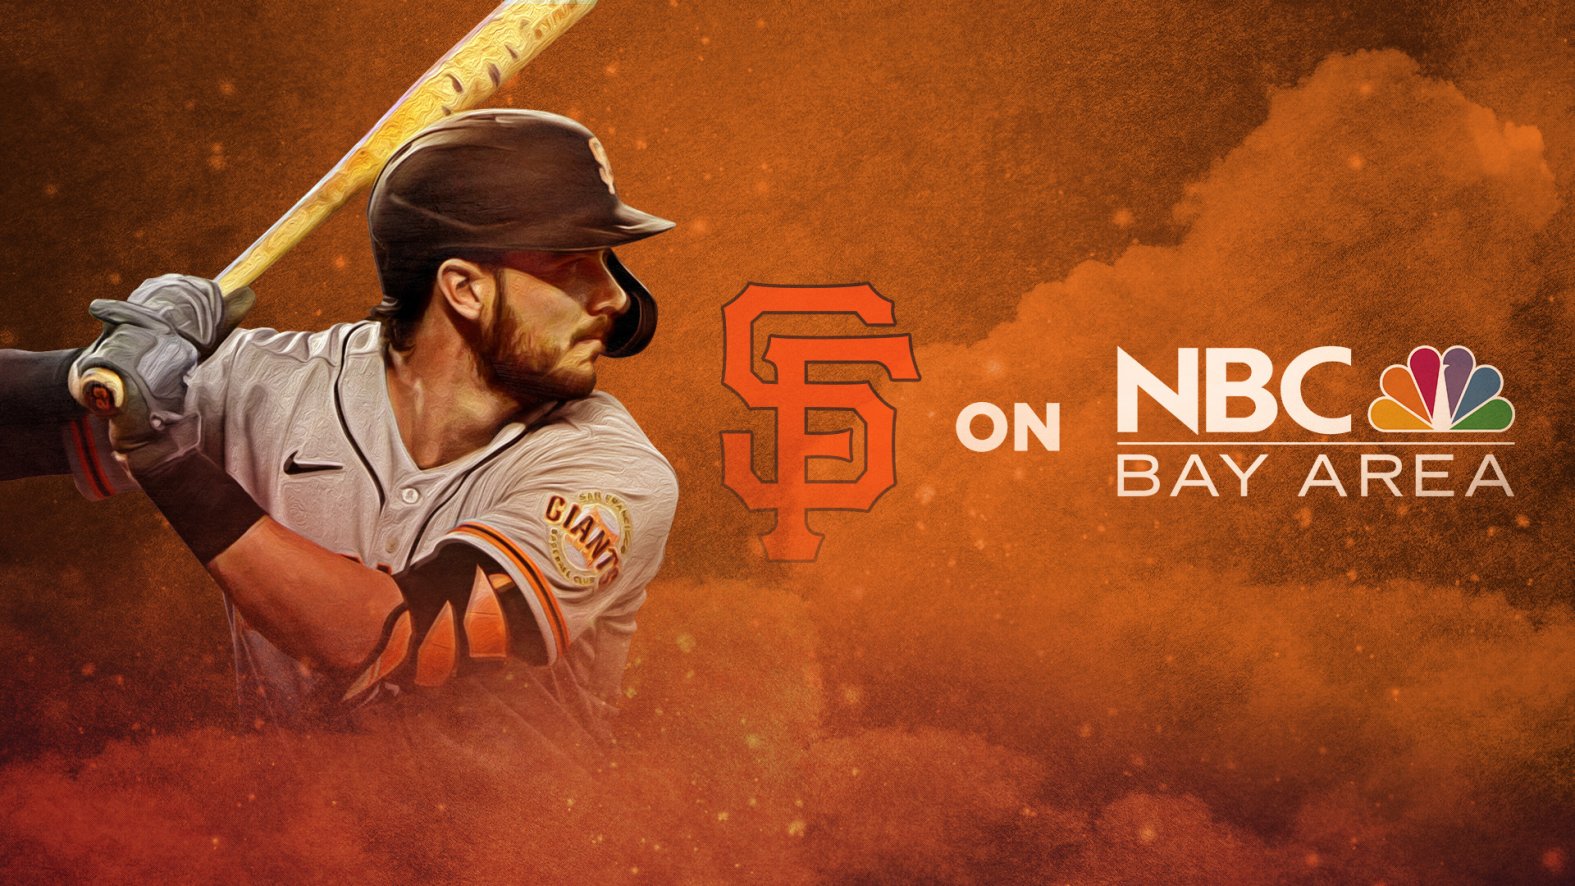 San Francisco Giants Schedule Watch Games on NBC Bay Area NBC Bay Area